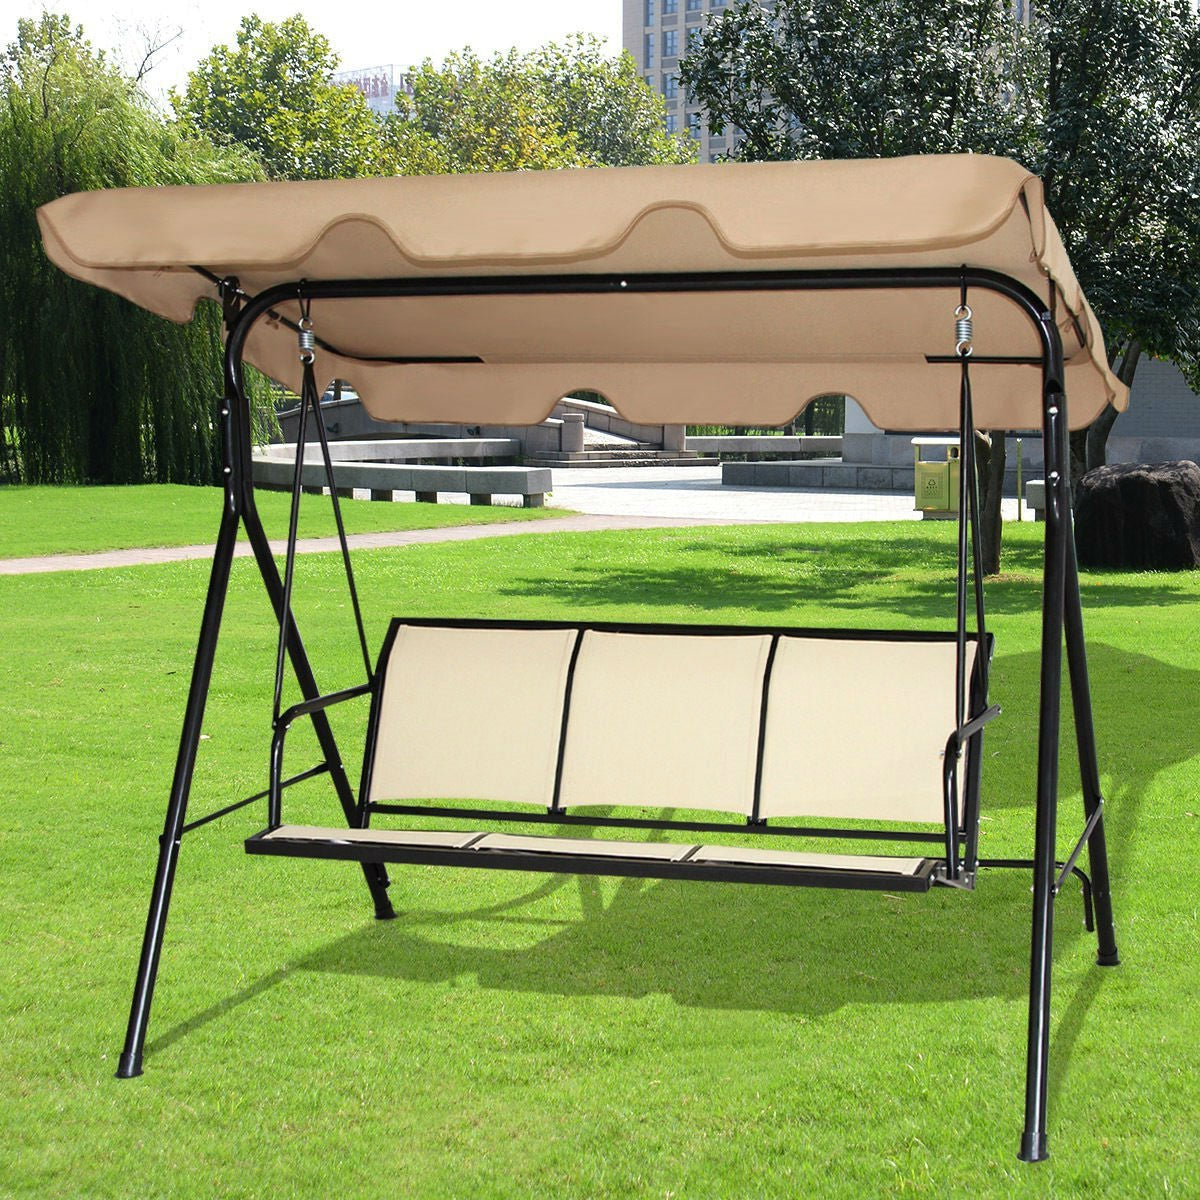 Outdoor > Outdoor Furniture > Porch Swings And Gliders - Outdoor Porch Patio 3-Person Canopy Swing In Light Brown